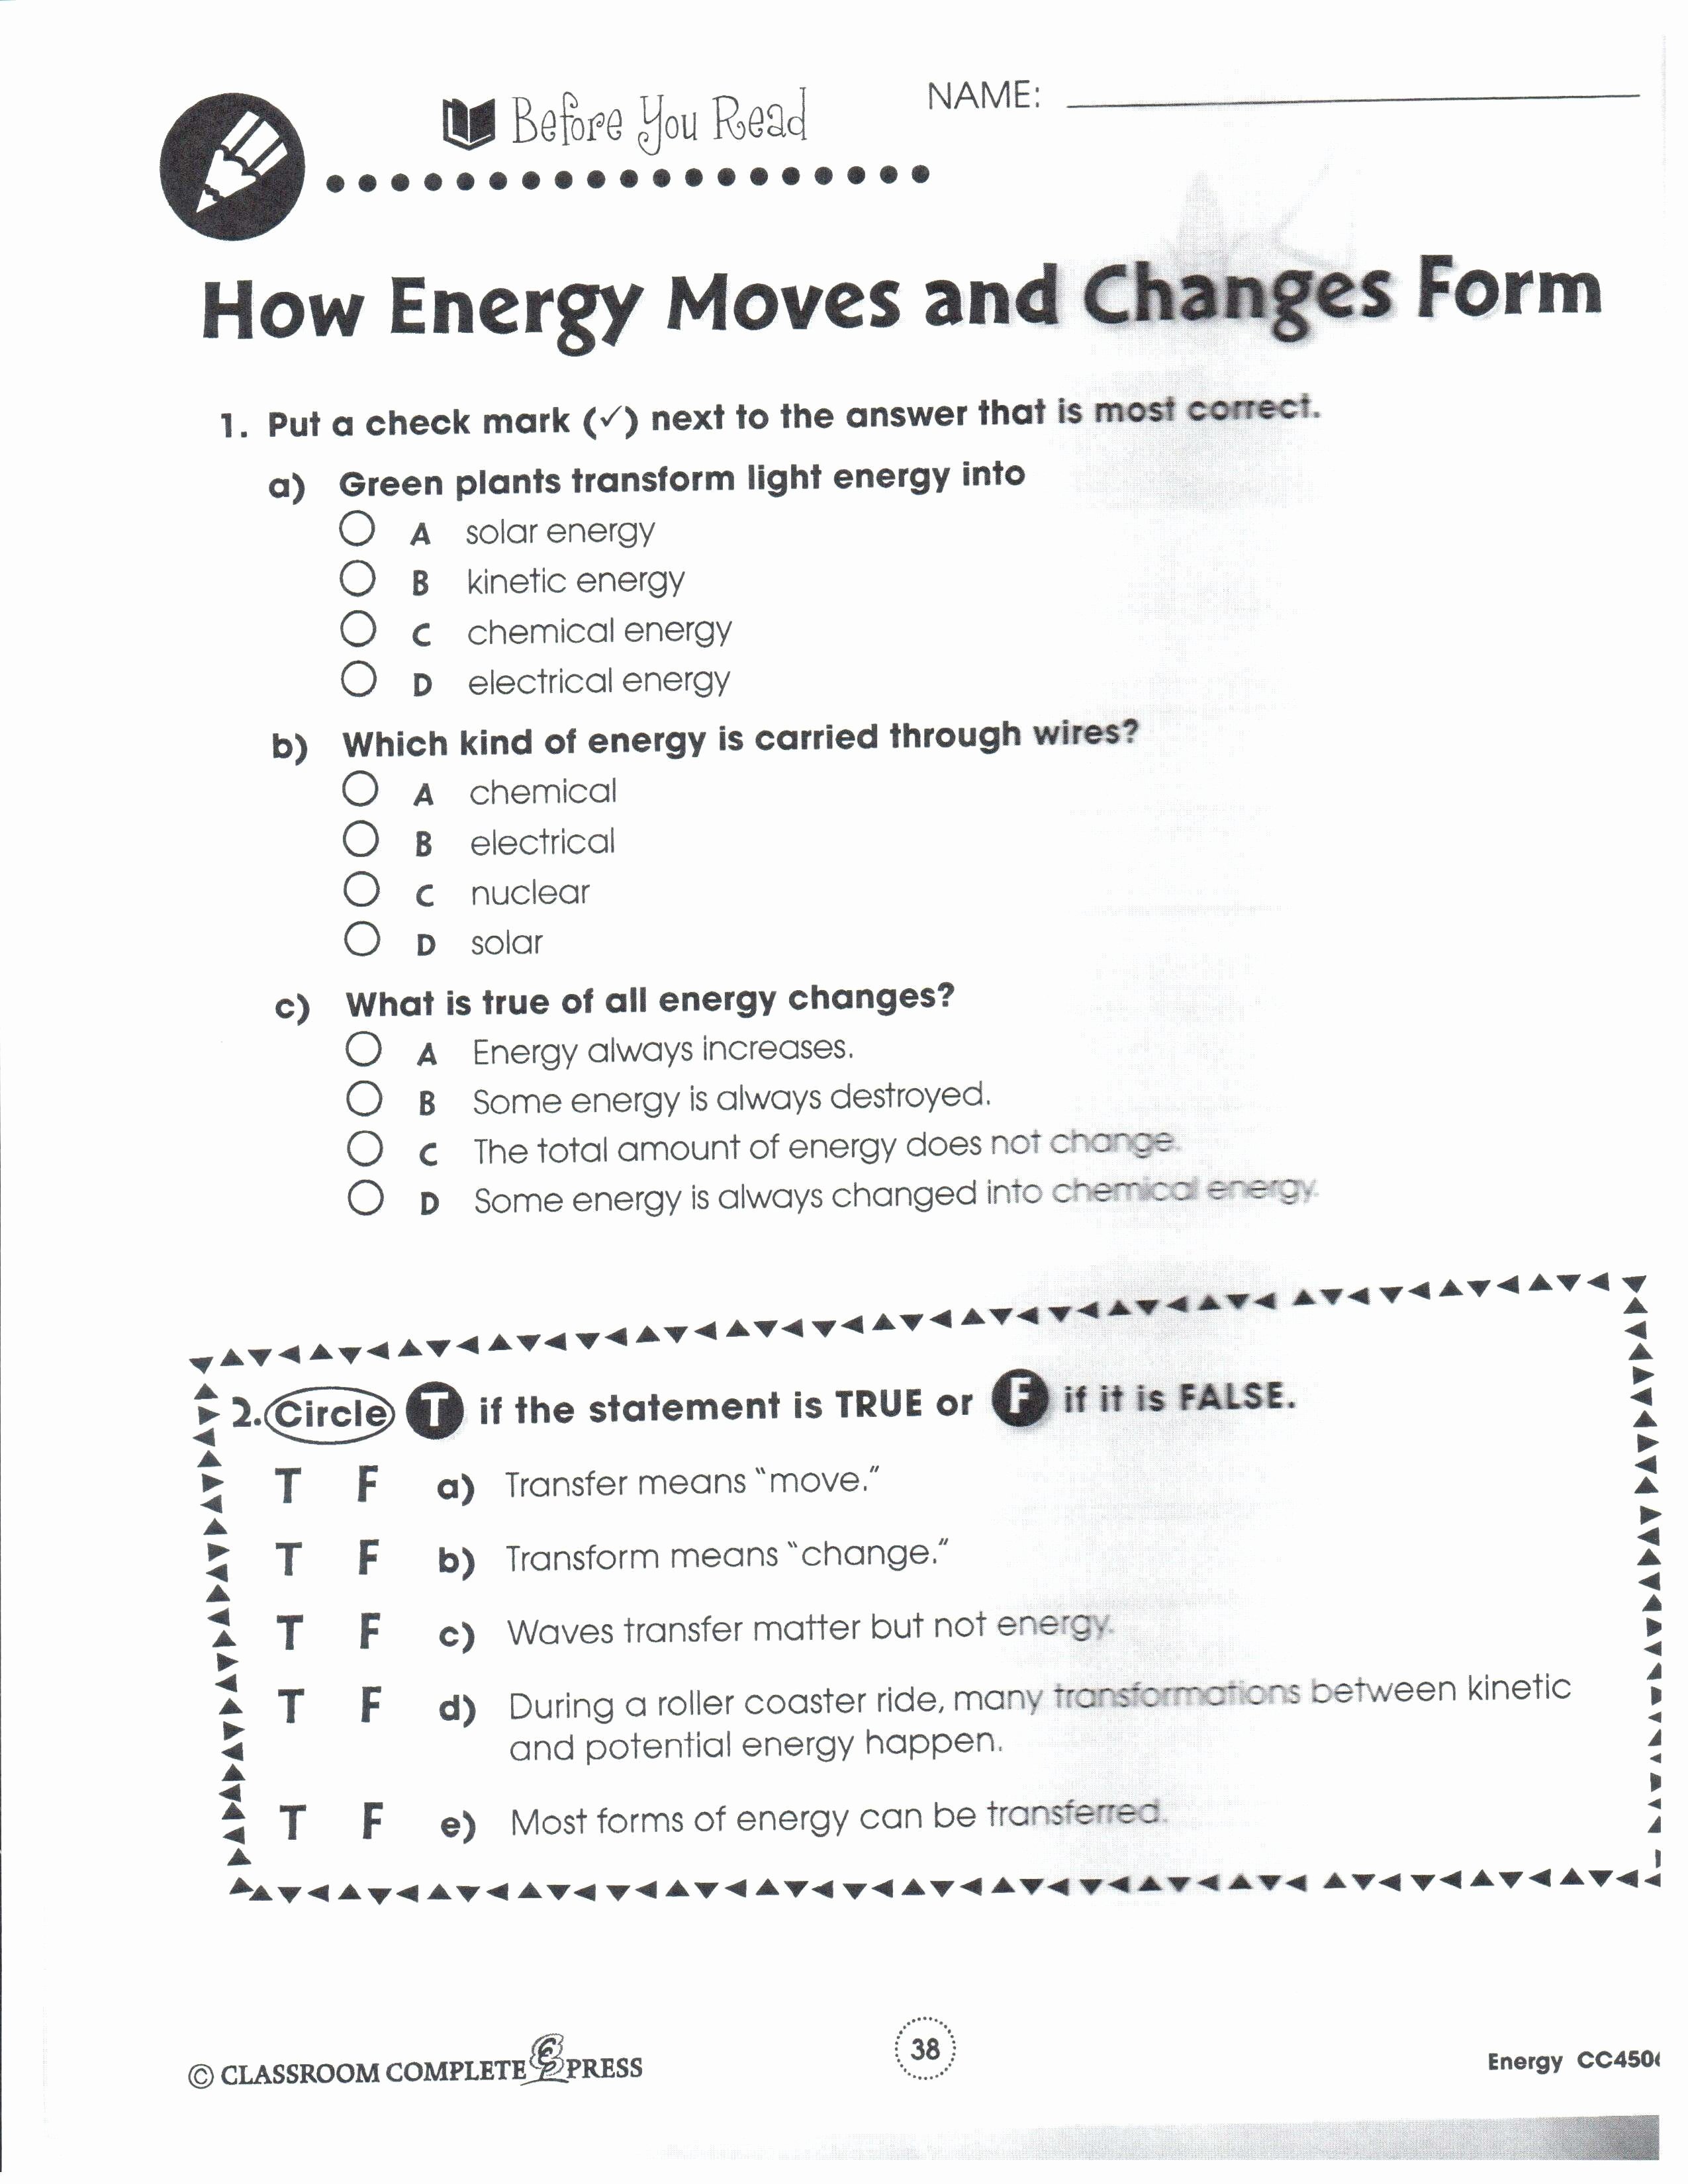 Principles Of Ecology Worksheet Answers Beautiful Chapter 2 Principles Ecology Worksheet Answers